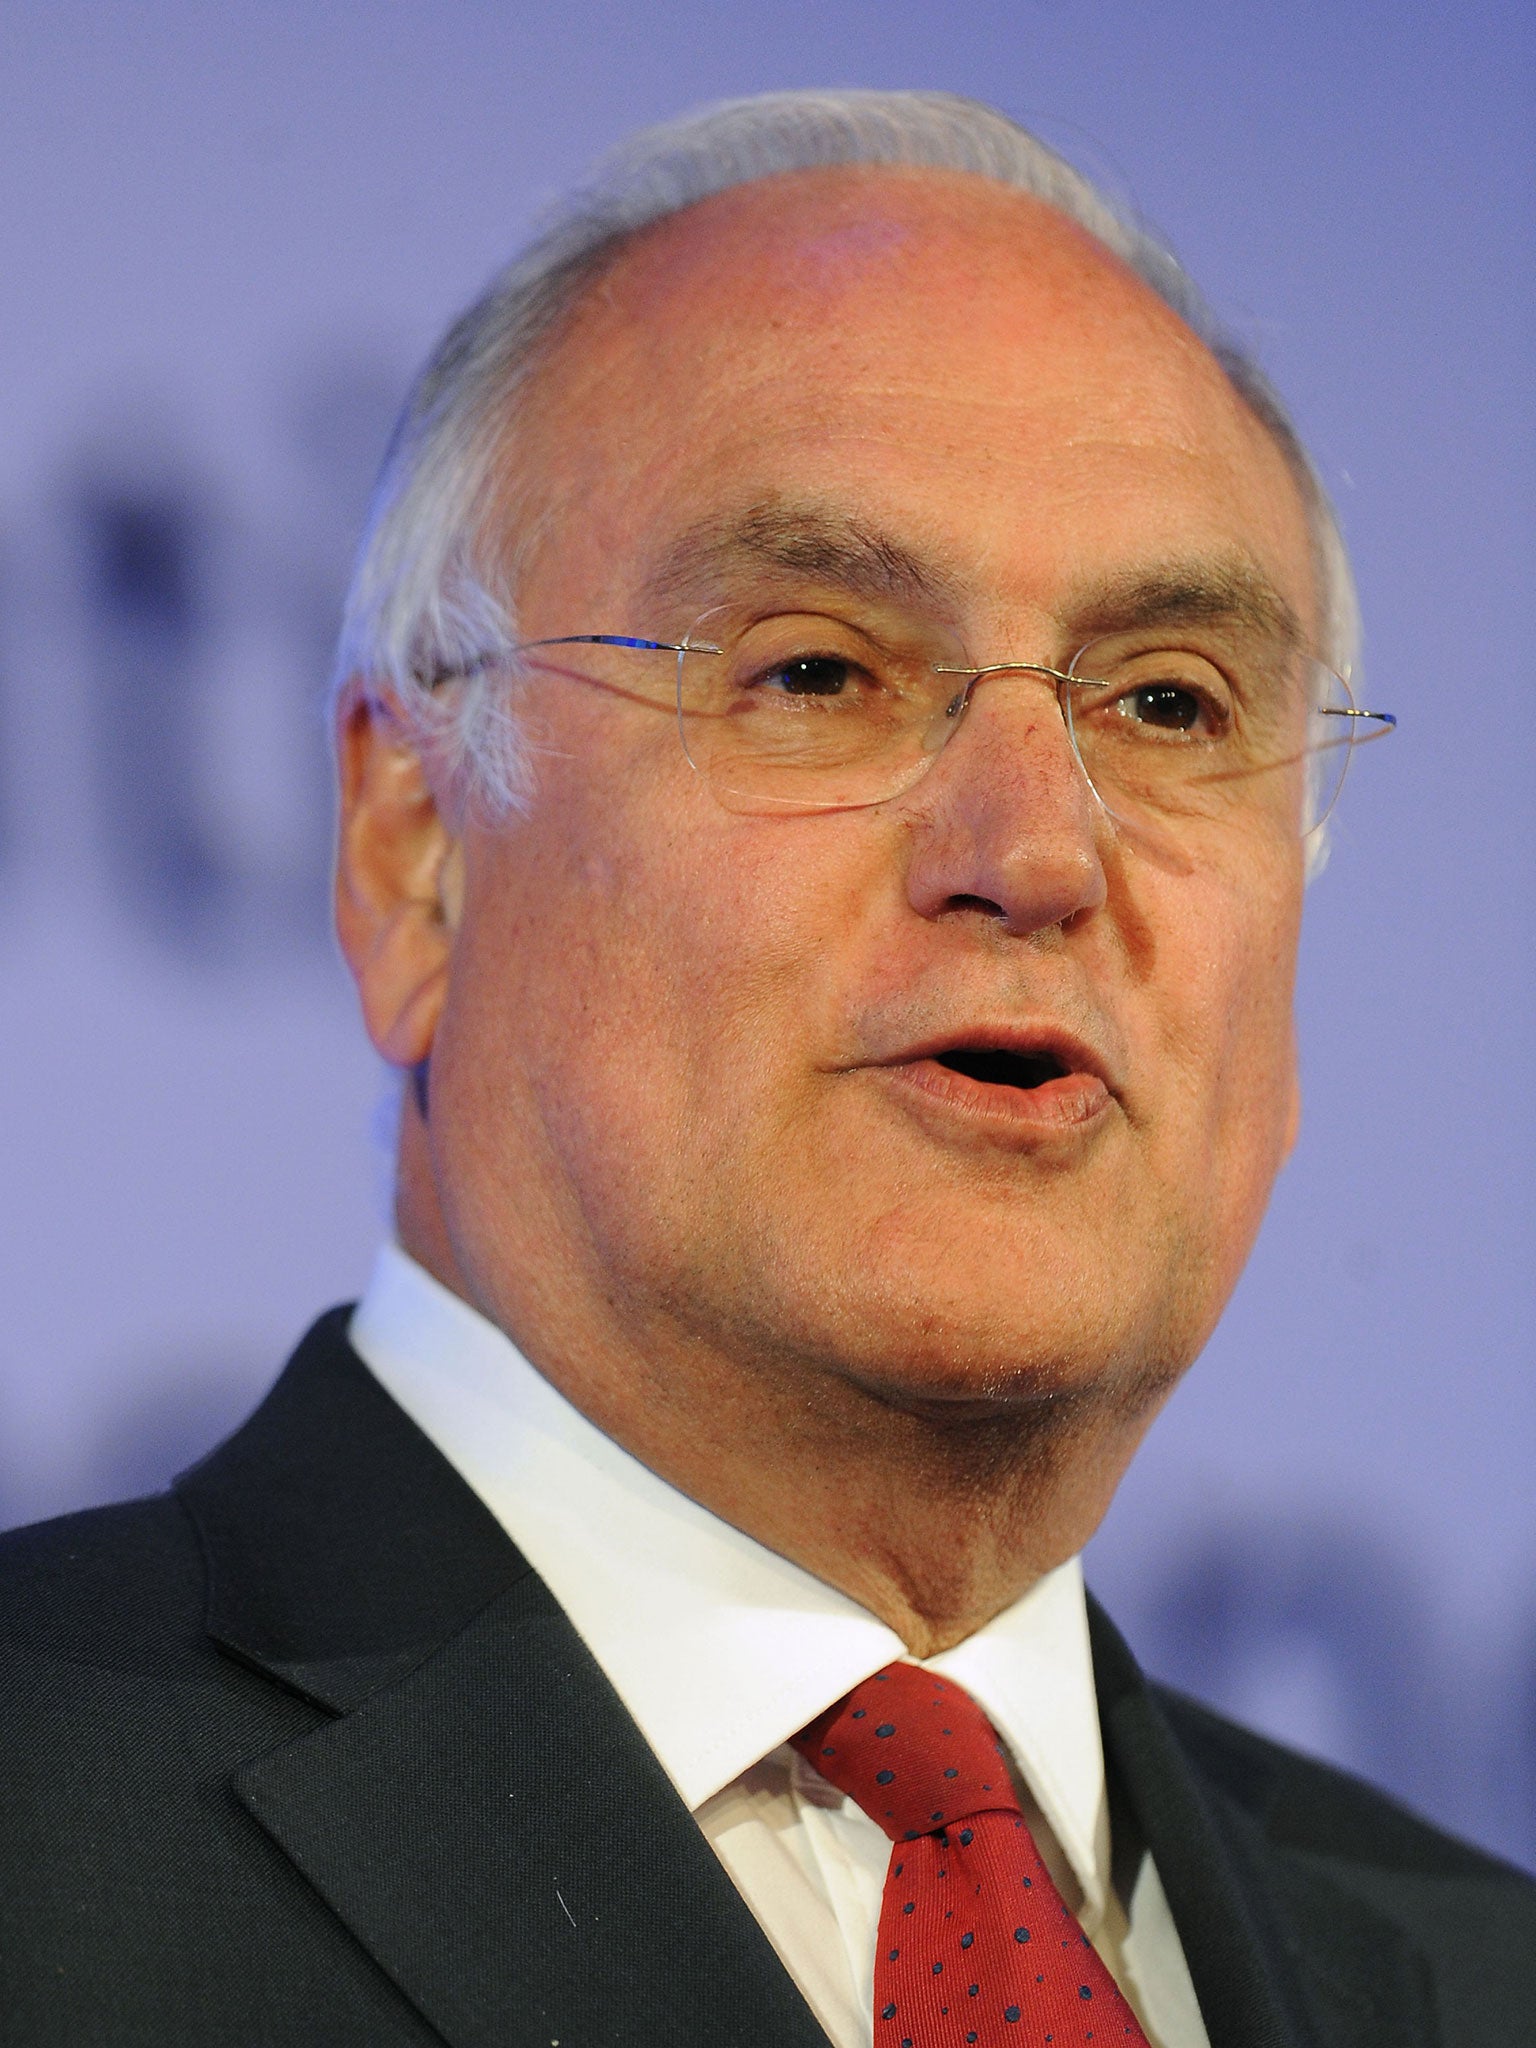 Sir Michael Wilshaw was responding to criticisms made by the Local Government Association